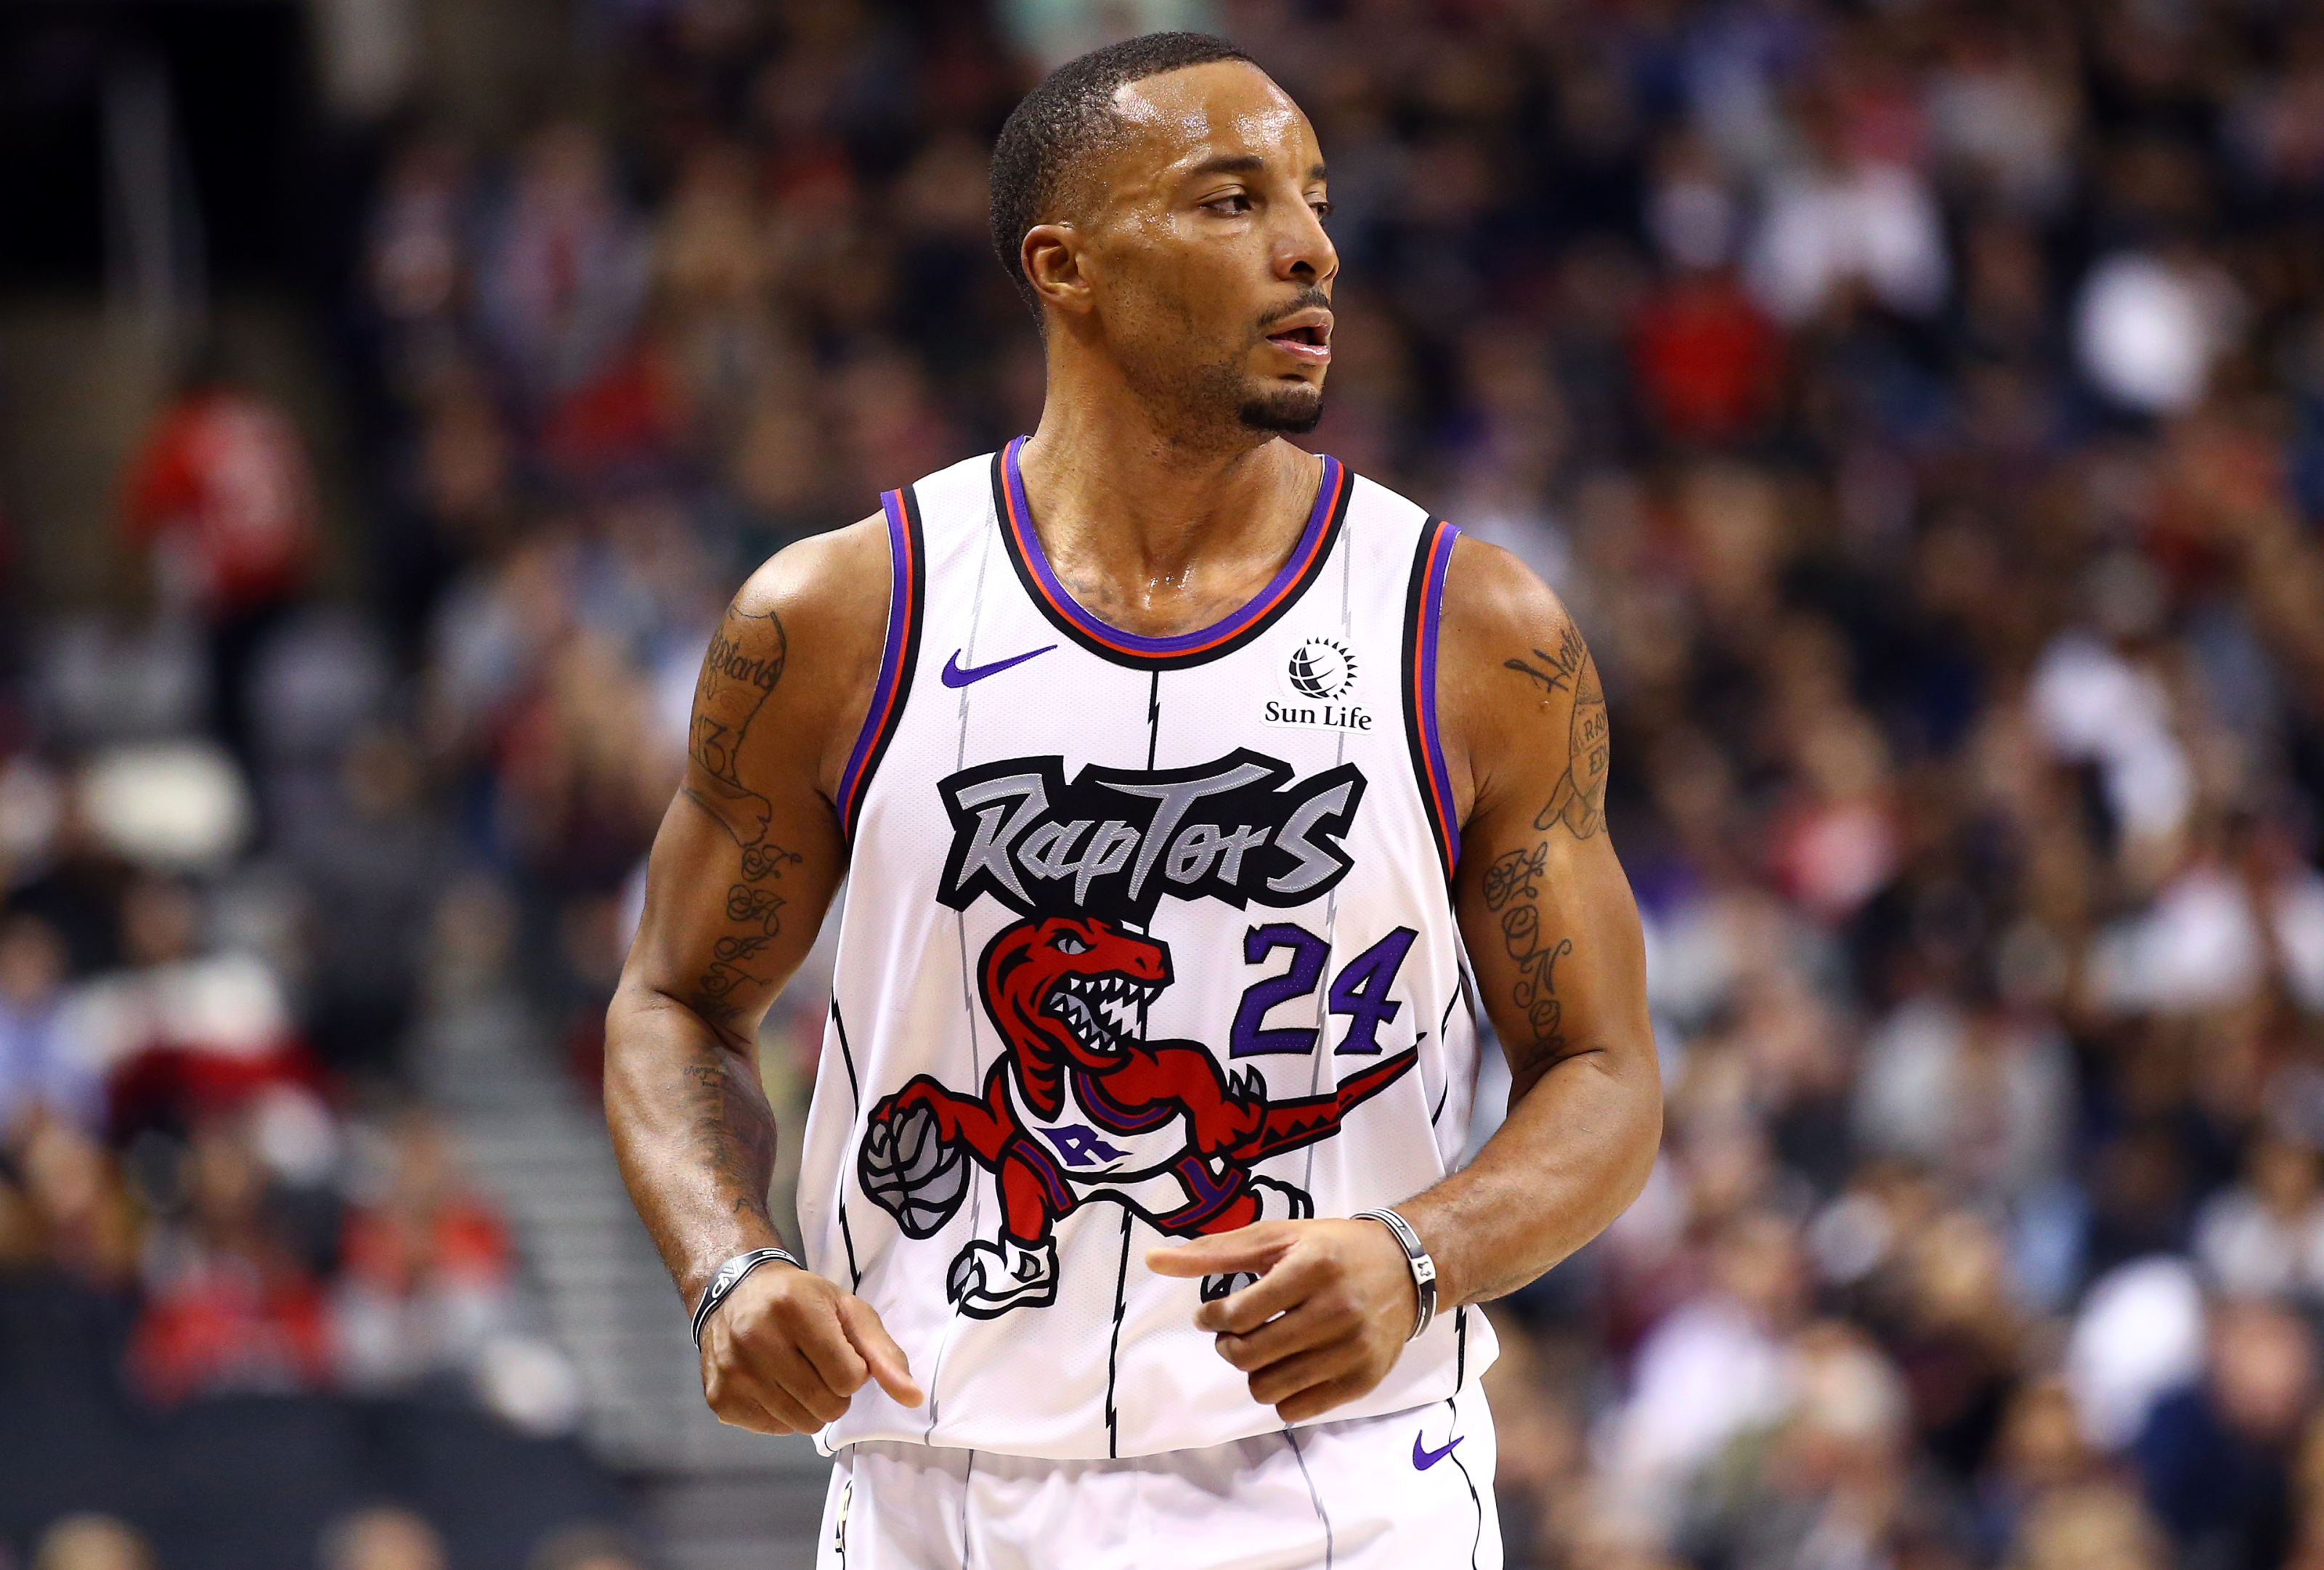 Raptors are bringing back 'The Dino' jersey for 2019-20 season